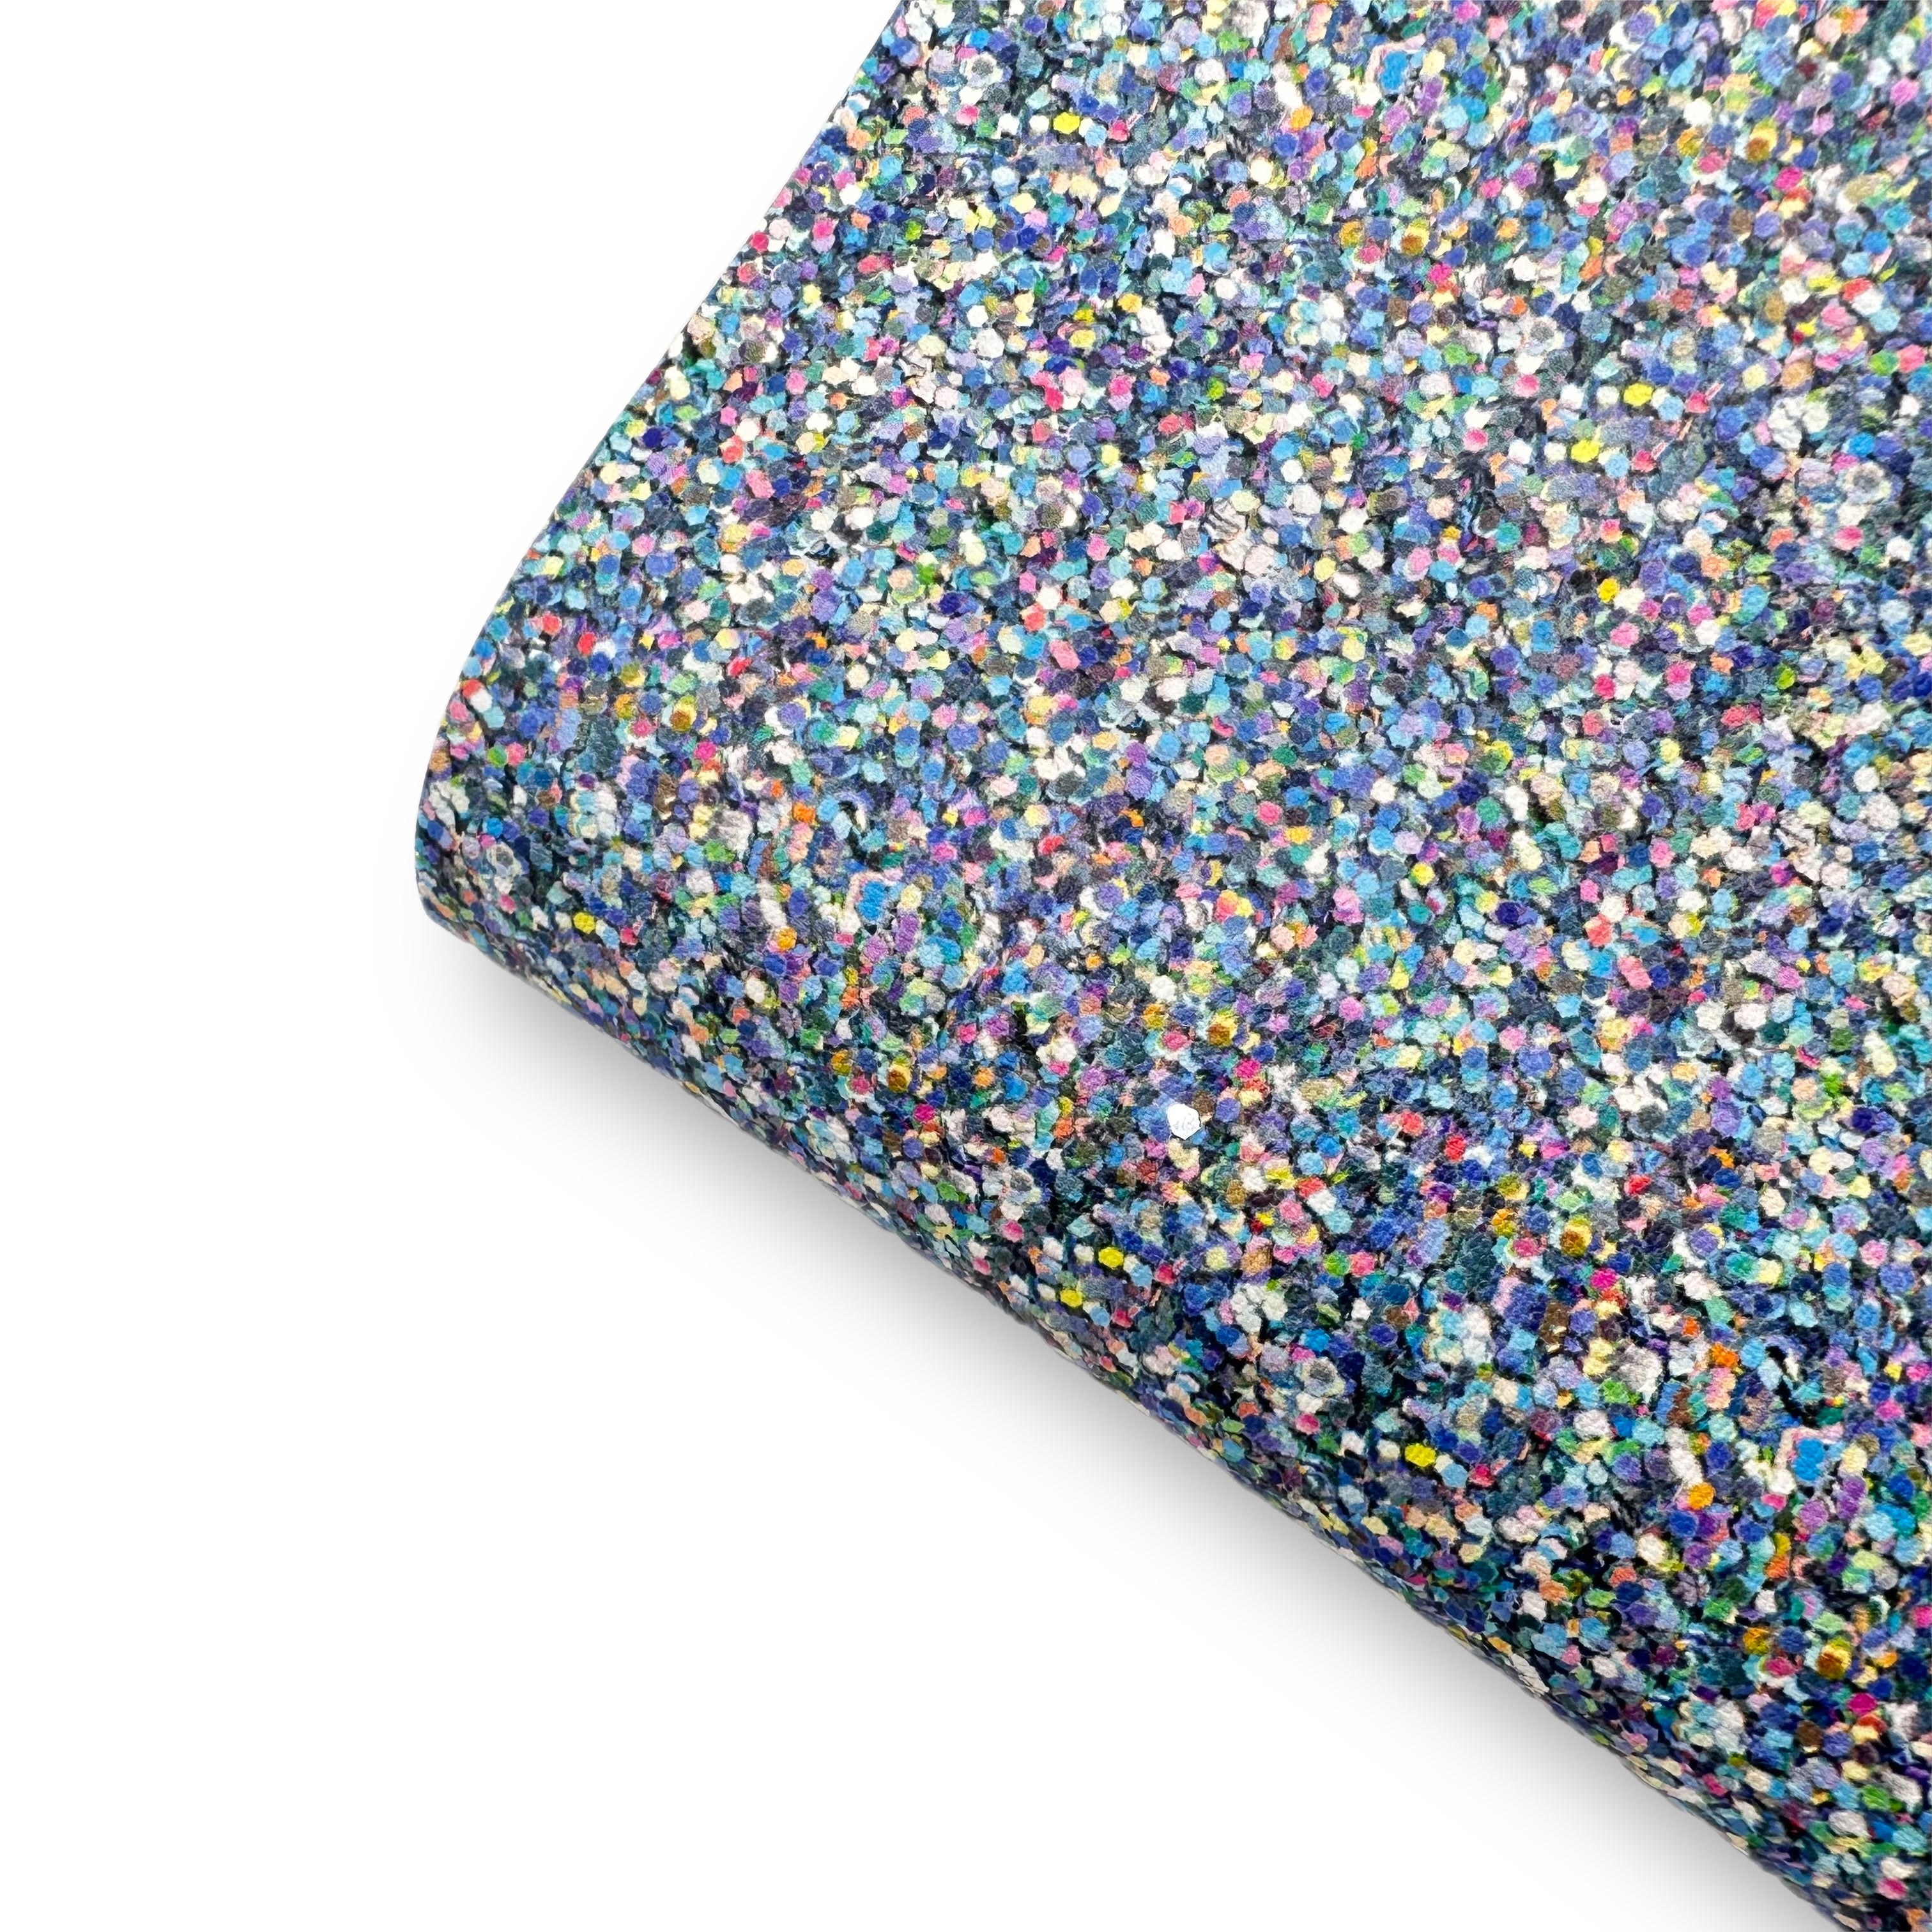 Disco Ball Faux Glitter Effect Premium Faux Leather Fabric Sheets